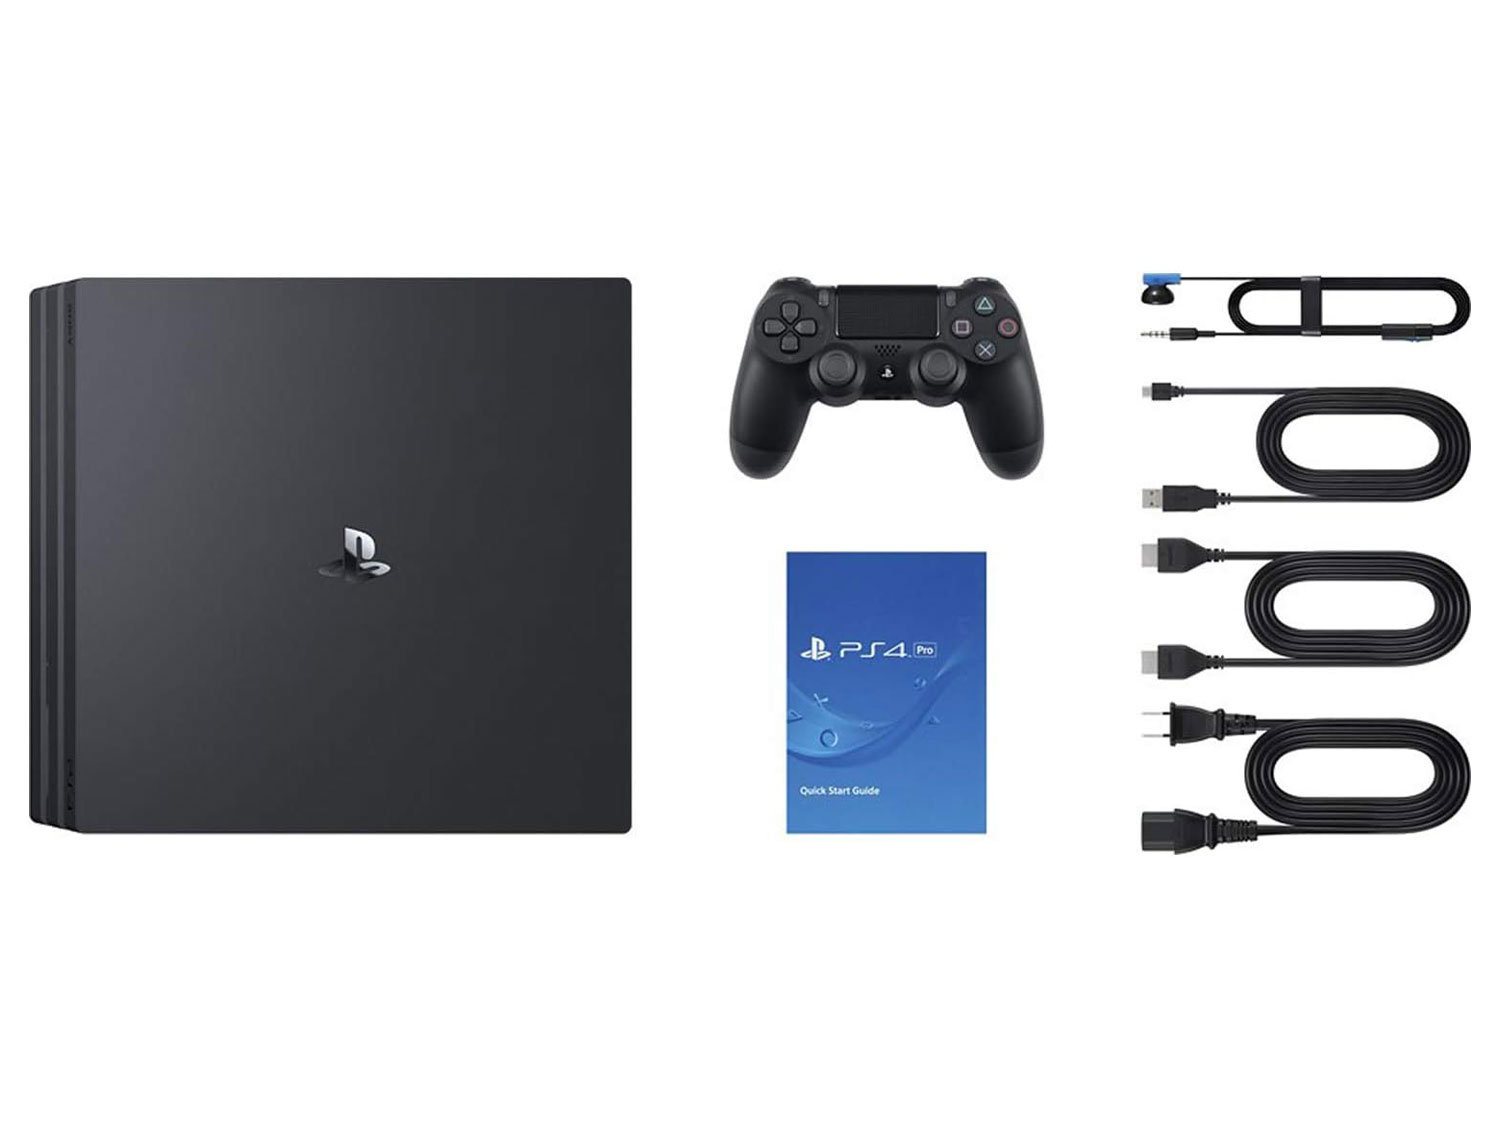 PS4 Pro with DualShock controllers - Ideal for Events and Parties